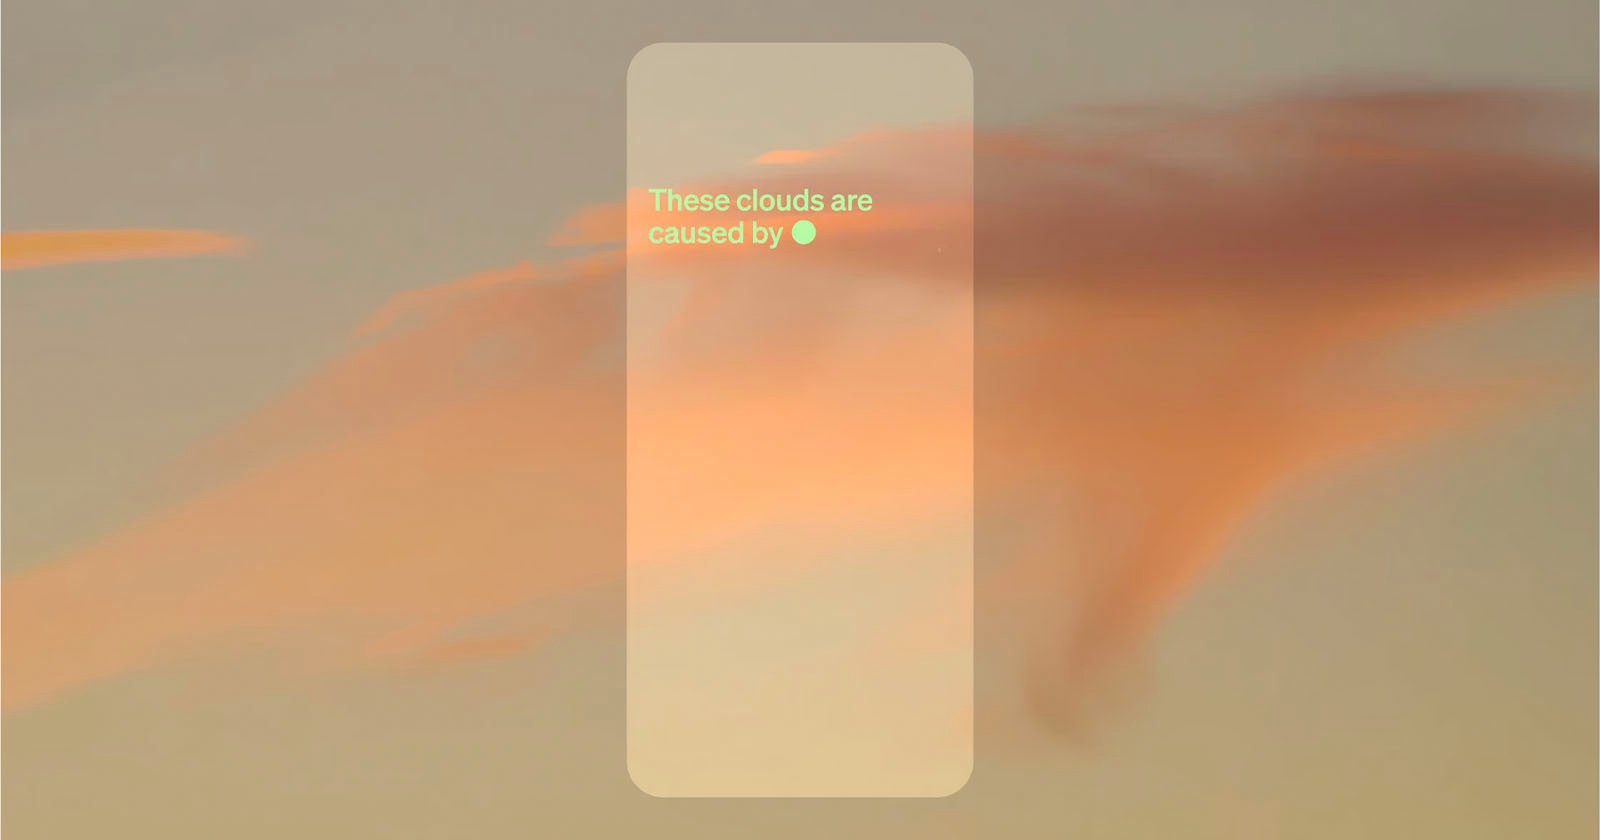 An text overlay askes what the cloud in the background are caused by.